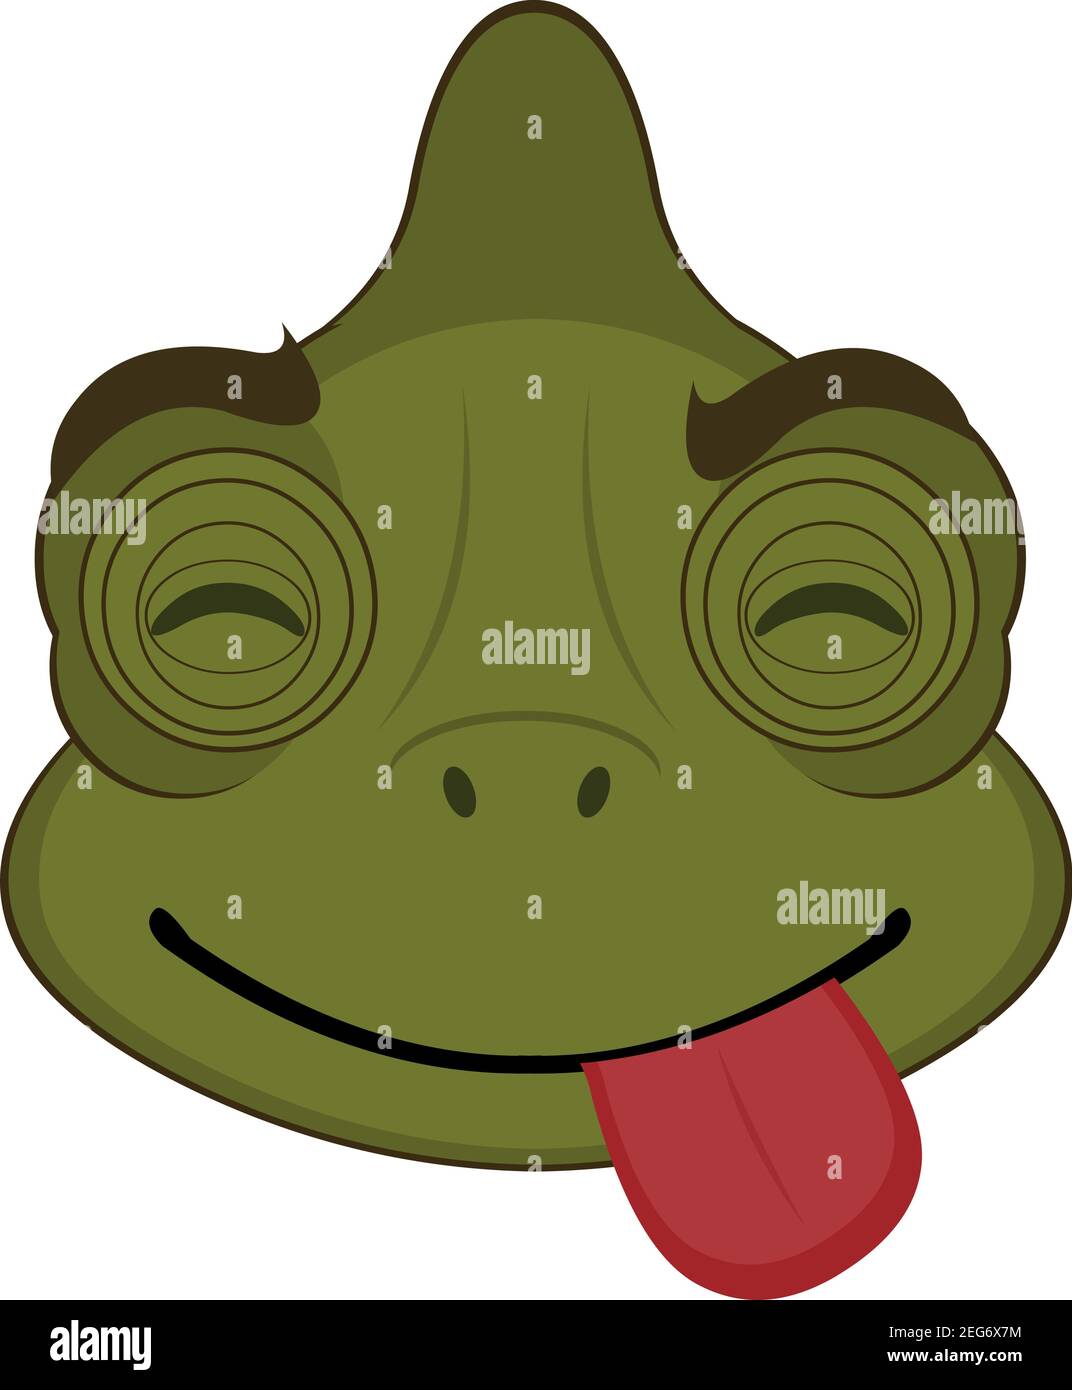 Vector emoticon  illustration cartoon of a chameleon's head with a joyful expression of pleasure with its eyes closed and sticking out its tongue Stock Vector